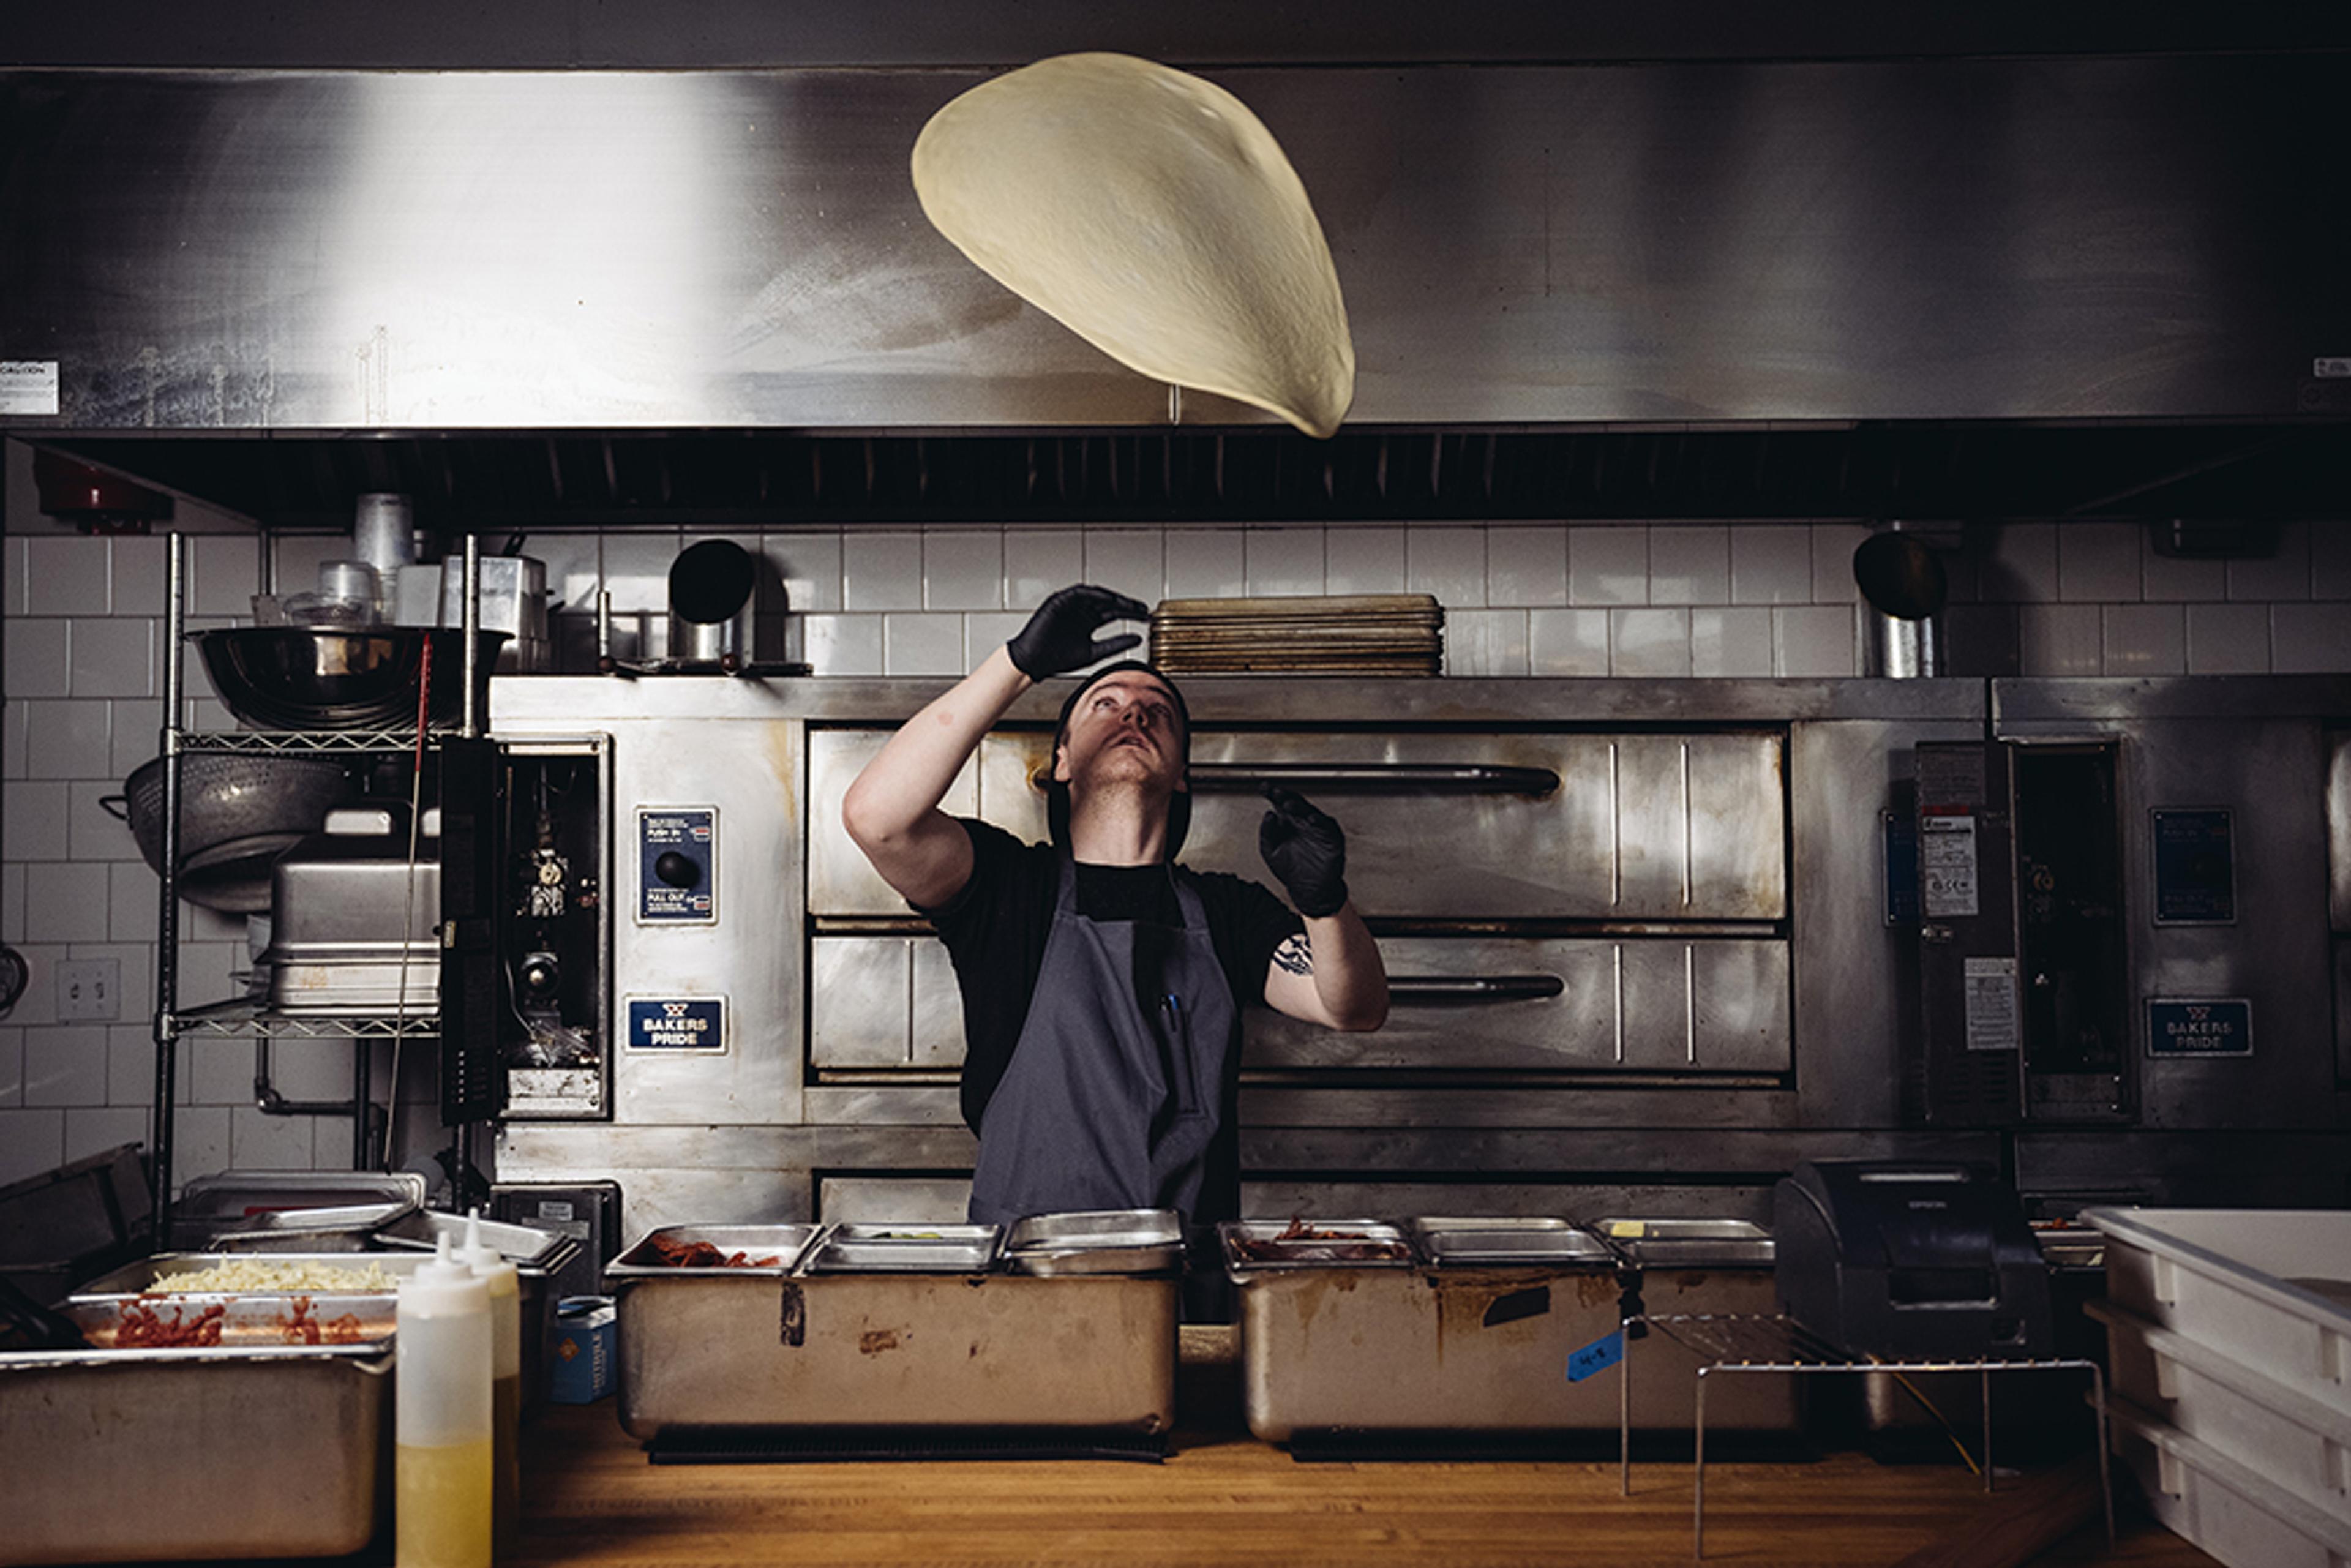 chef tossing pizza dough in kitchen